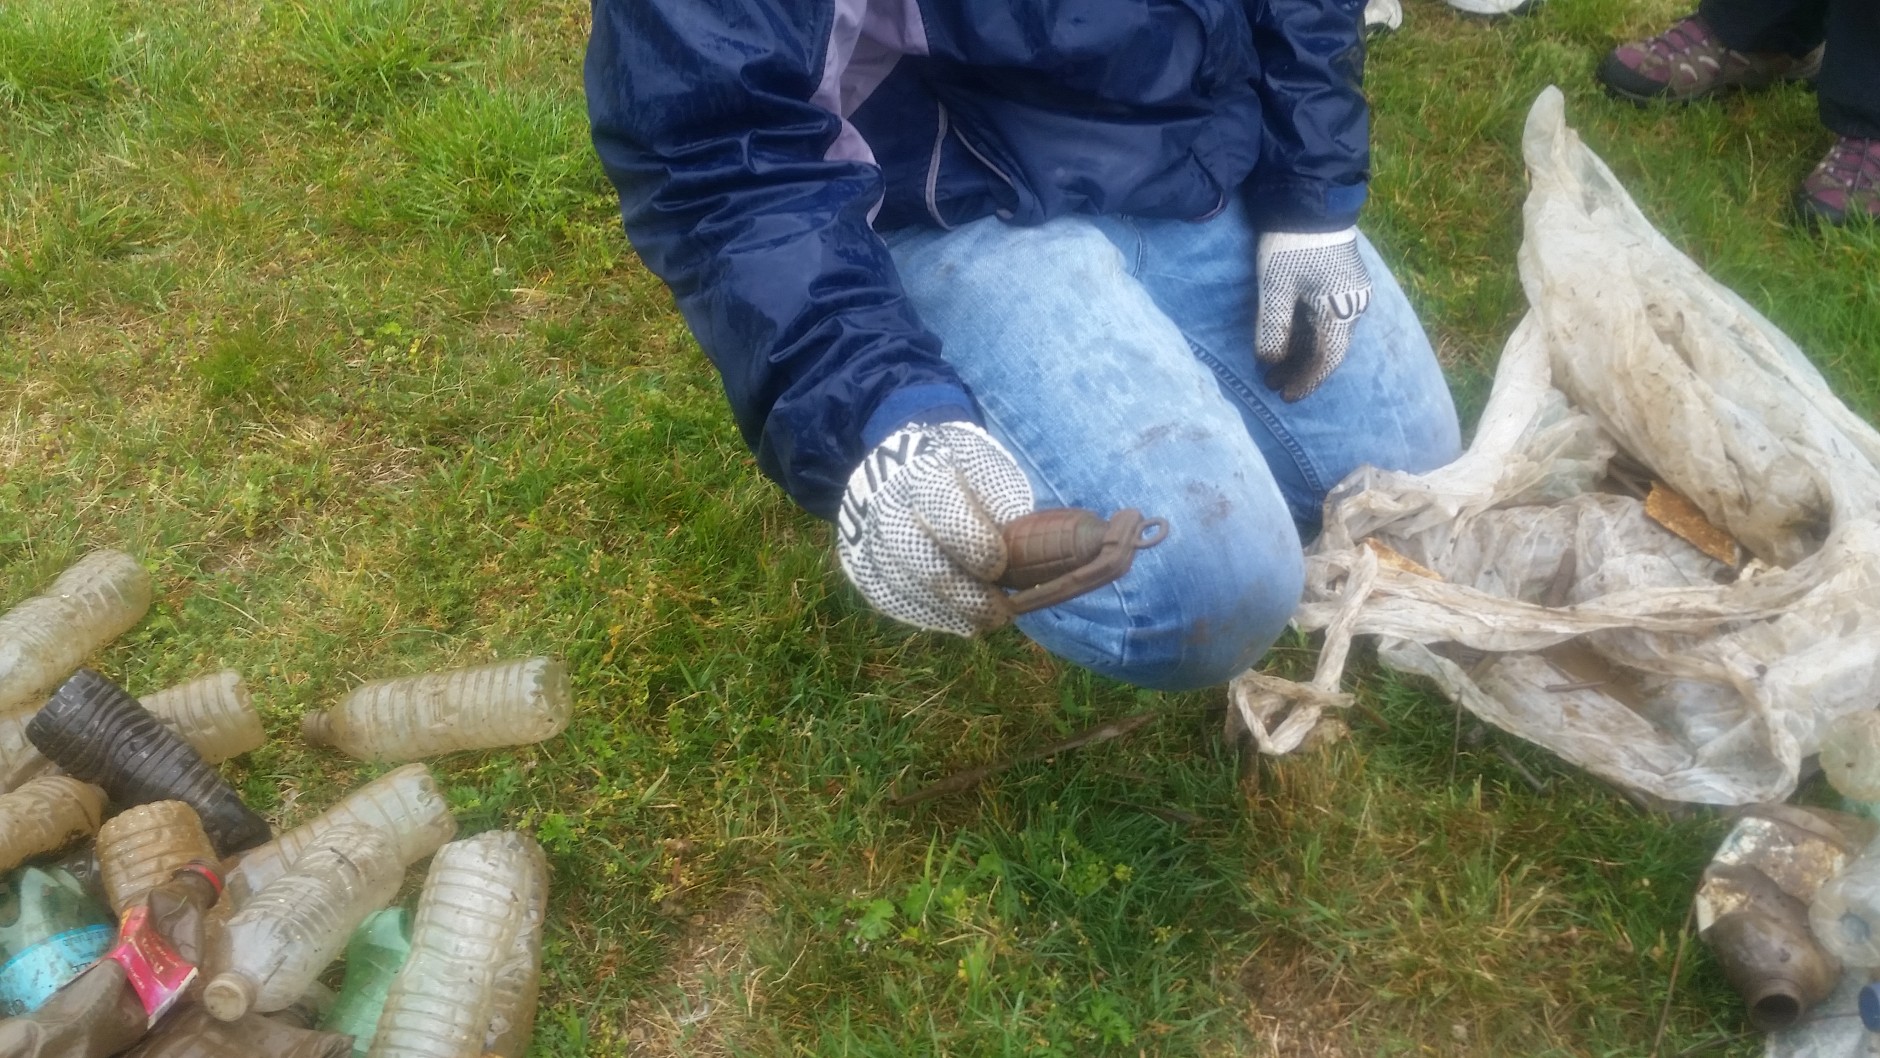  Matt Robinson from D.C.'s Department of Energy and the Environment found what apperas to be a plastic grenade during an Earth Day cleanup at Anacostia's River Terrace Park. (WTOP/Allison Keyes)